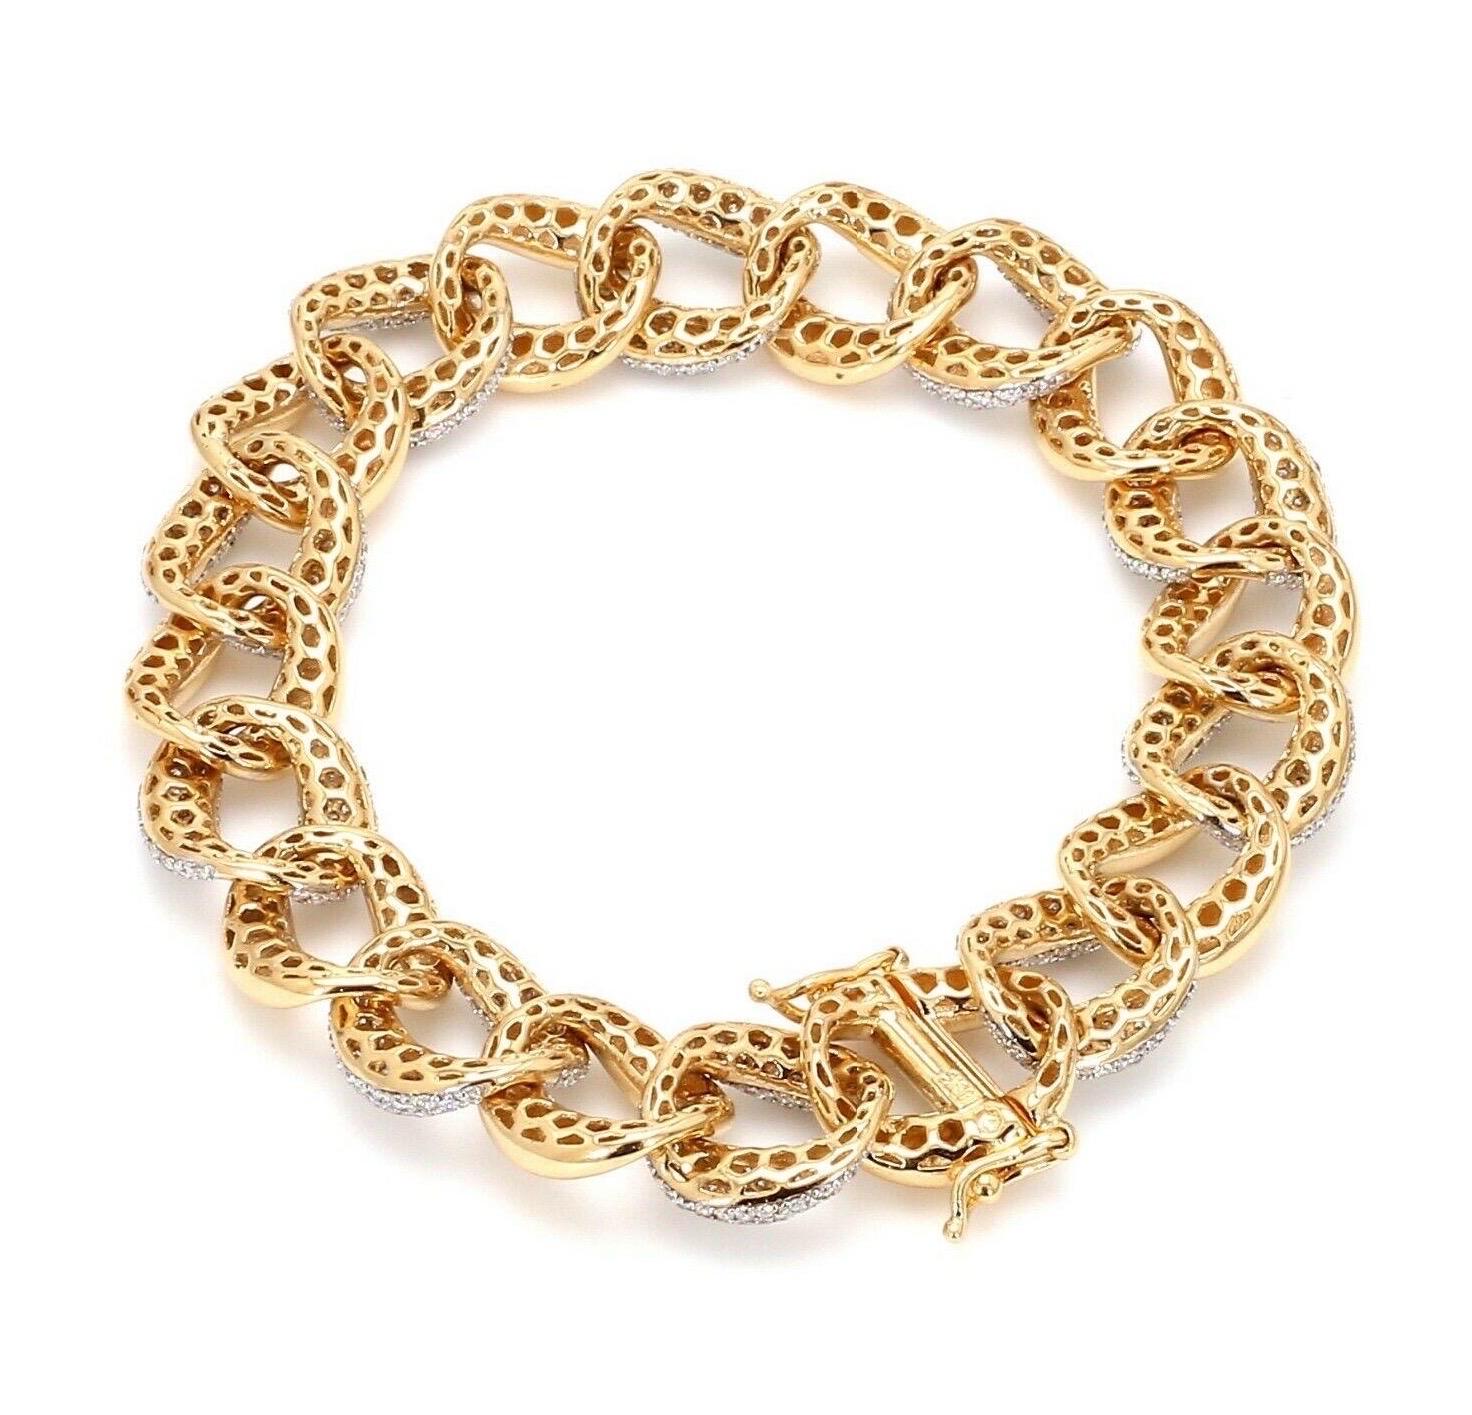 Cast from 18-karat yellow gold, this stunning link bracelet is hand set with 5.60 carats of sparkling diamonds. 
Bracelet Size 7 inches. Also available in white gold.

FOLLOW MEGHNA JEWELS storefront to view the latest collection & exclusive pieces.